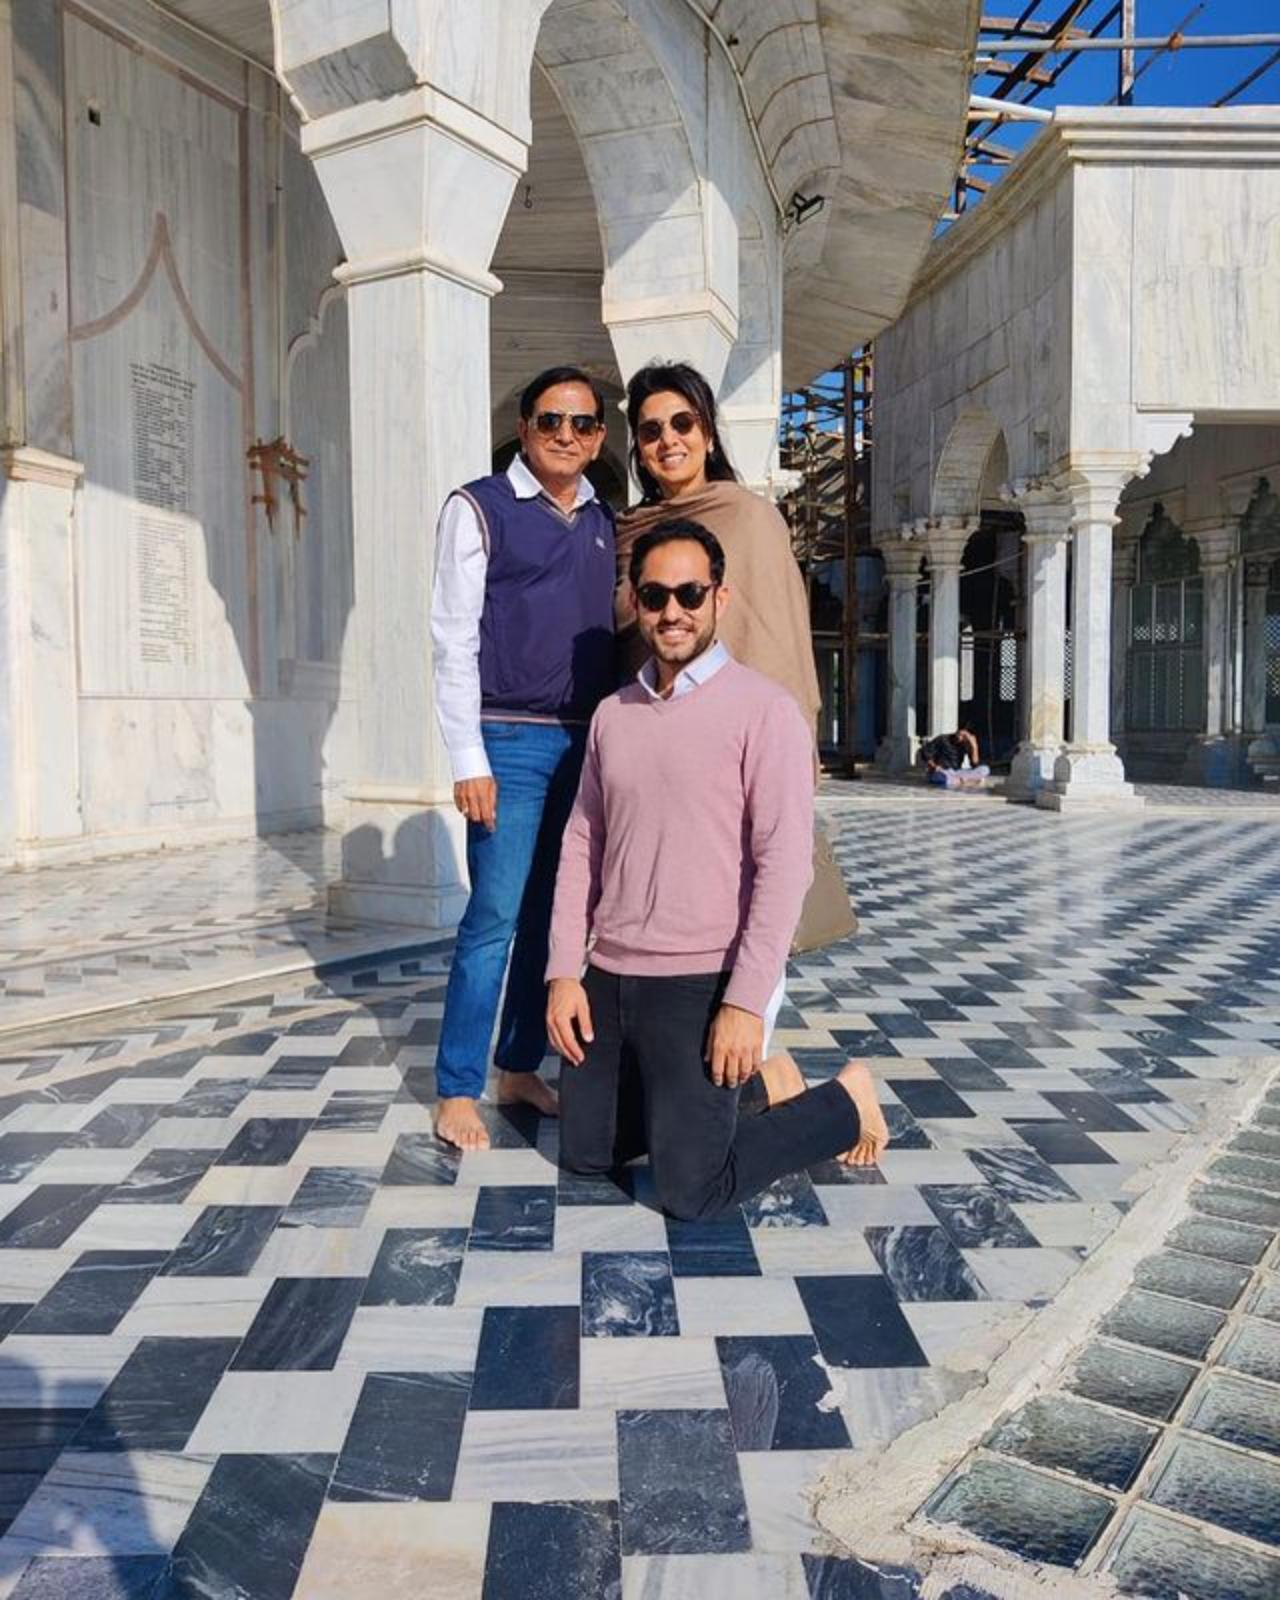 Neetu Kapoor shared this picture from a temple visit. She captioned the image, 'After 30 years visited the same temple with @raj_bansal this time with his son'